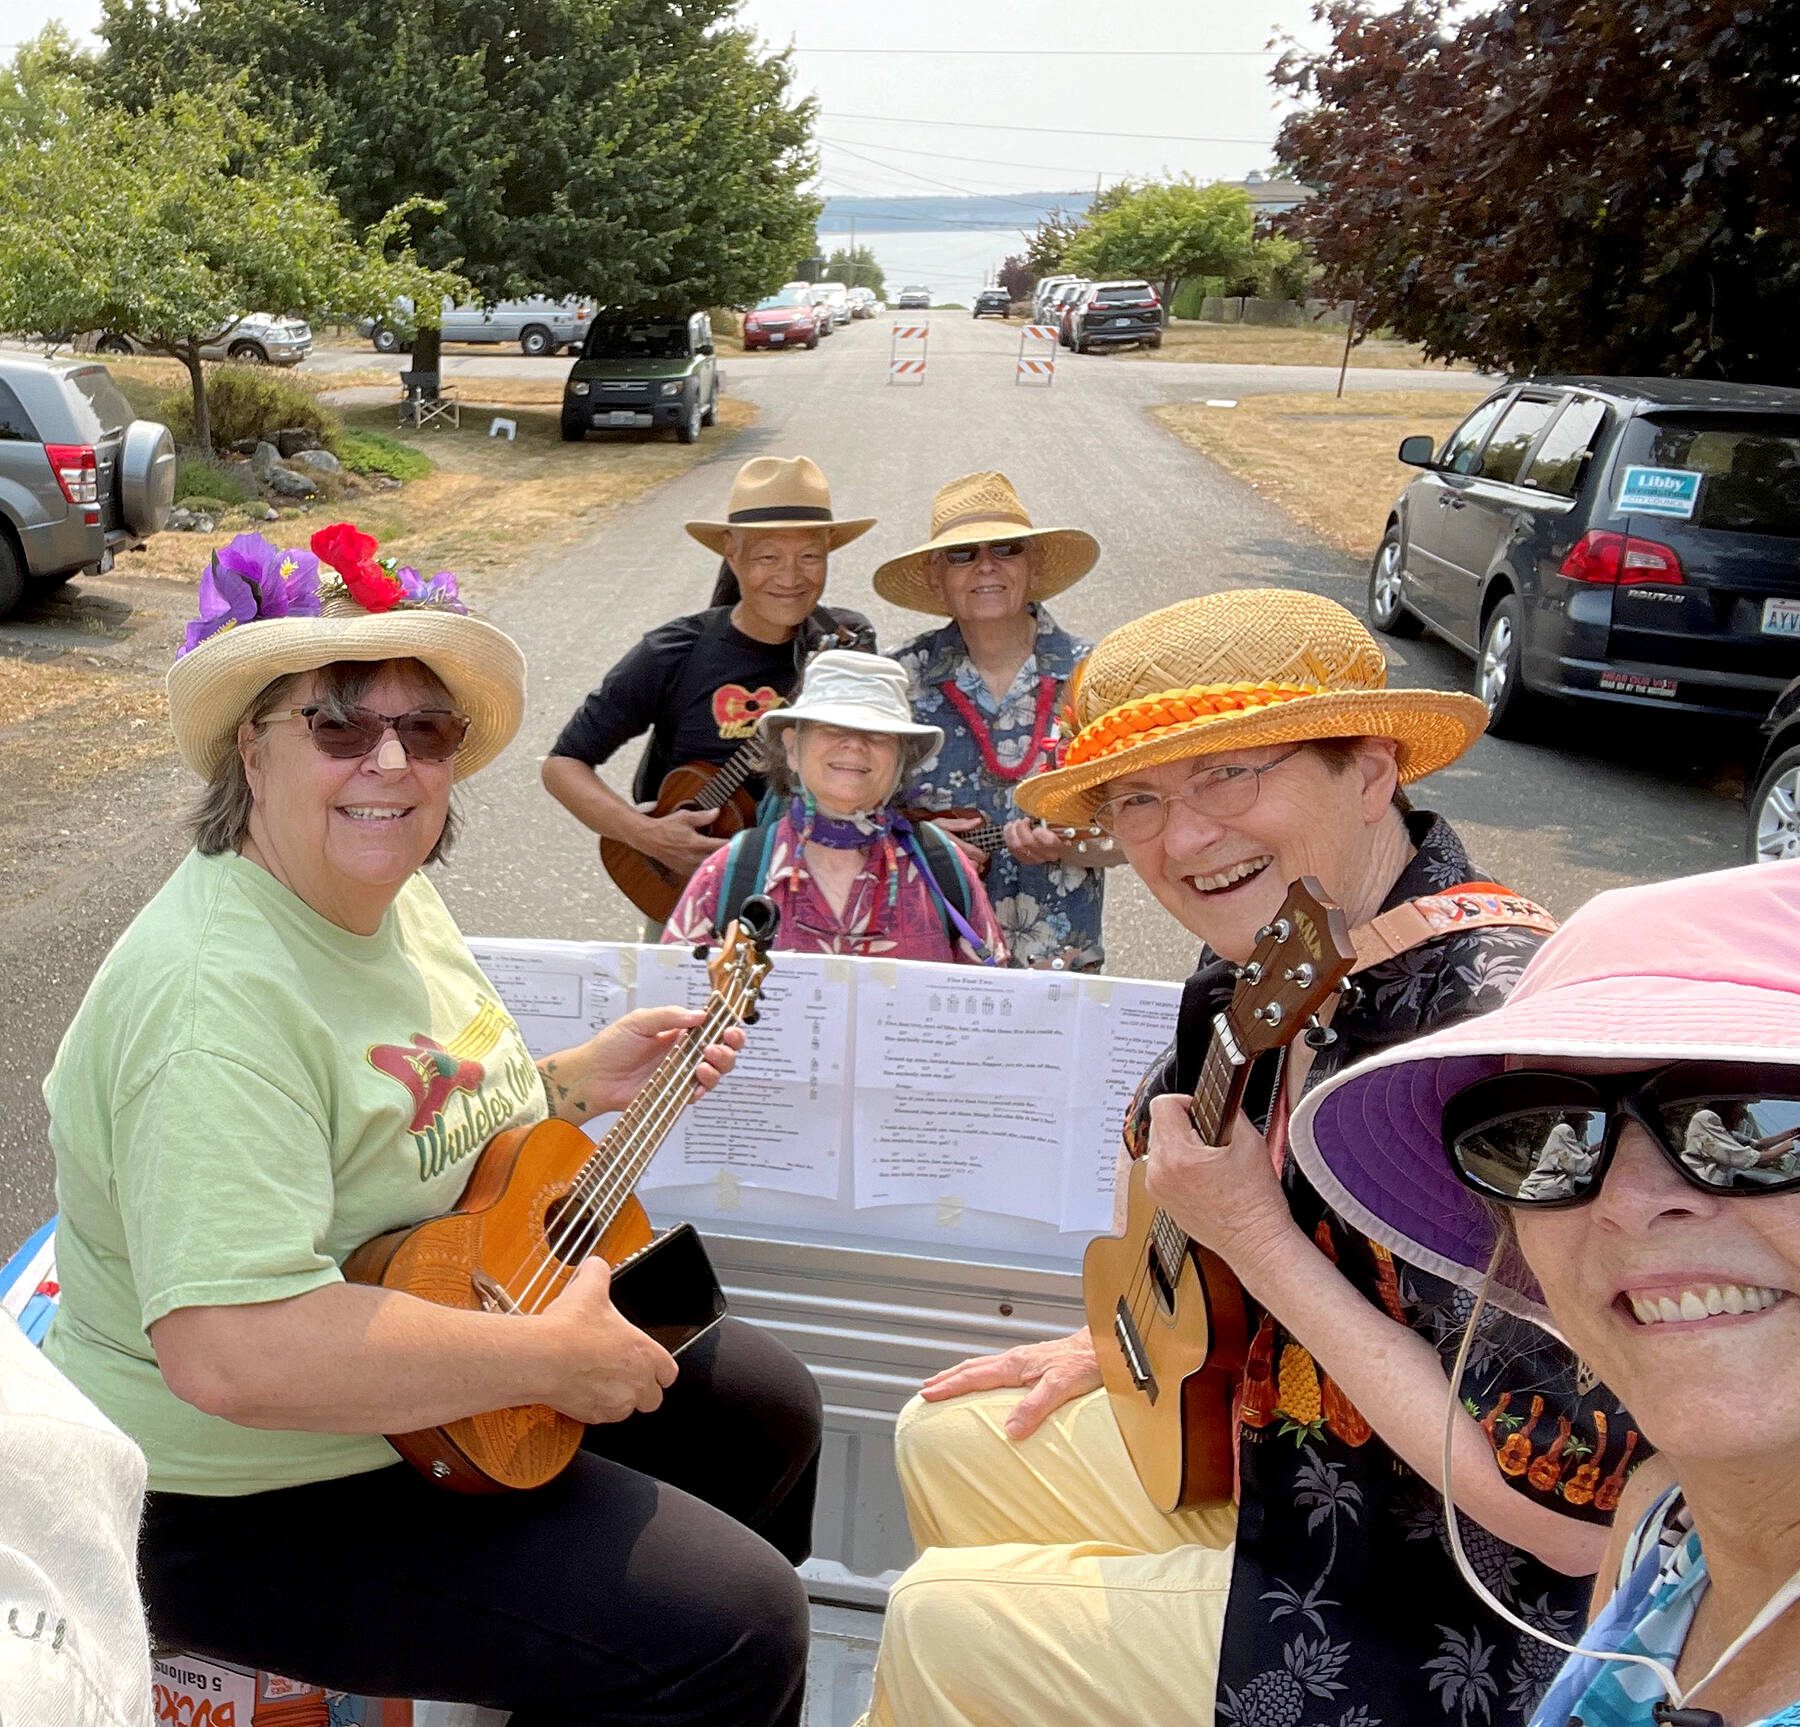 From left, Patricia Bolen, Geoff Fong, Anne Ficarra, Walter Vaux, Debbie Littlejohn and Terri Alexander ride on the Ukuleles Unite float, preparing for the August 2021 Rhody Parade in Port Townsend. The ukulelists are part of Bolen’s support system as she recovers from a difficult series of events. (Ukuleles Unite)